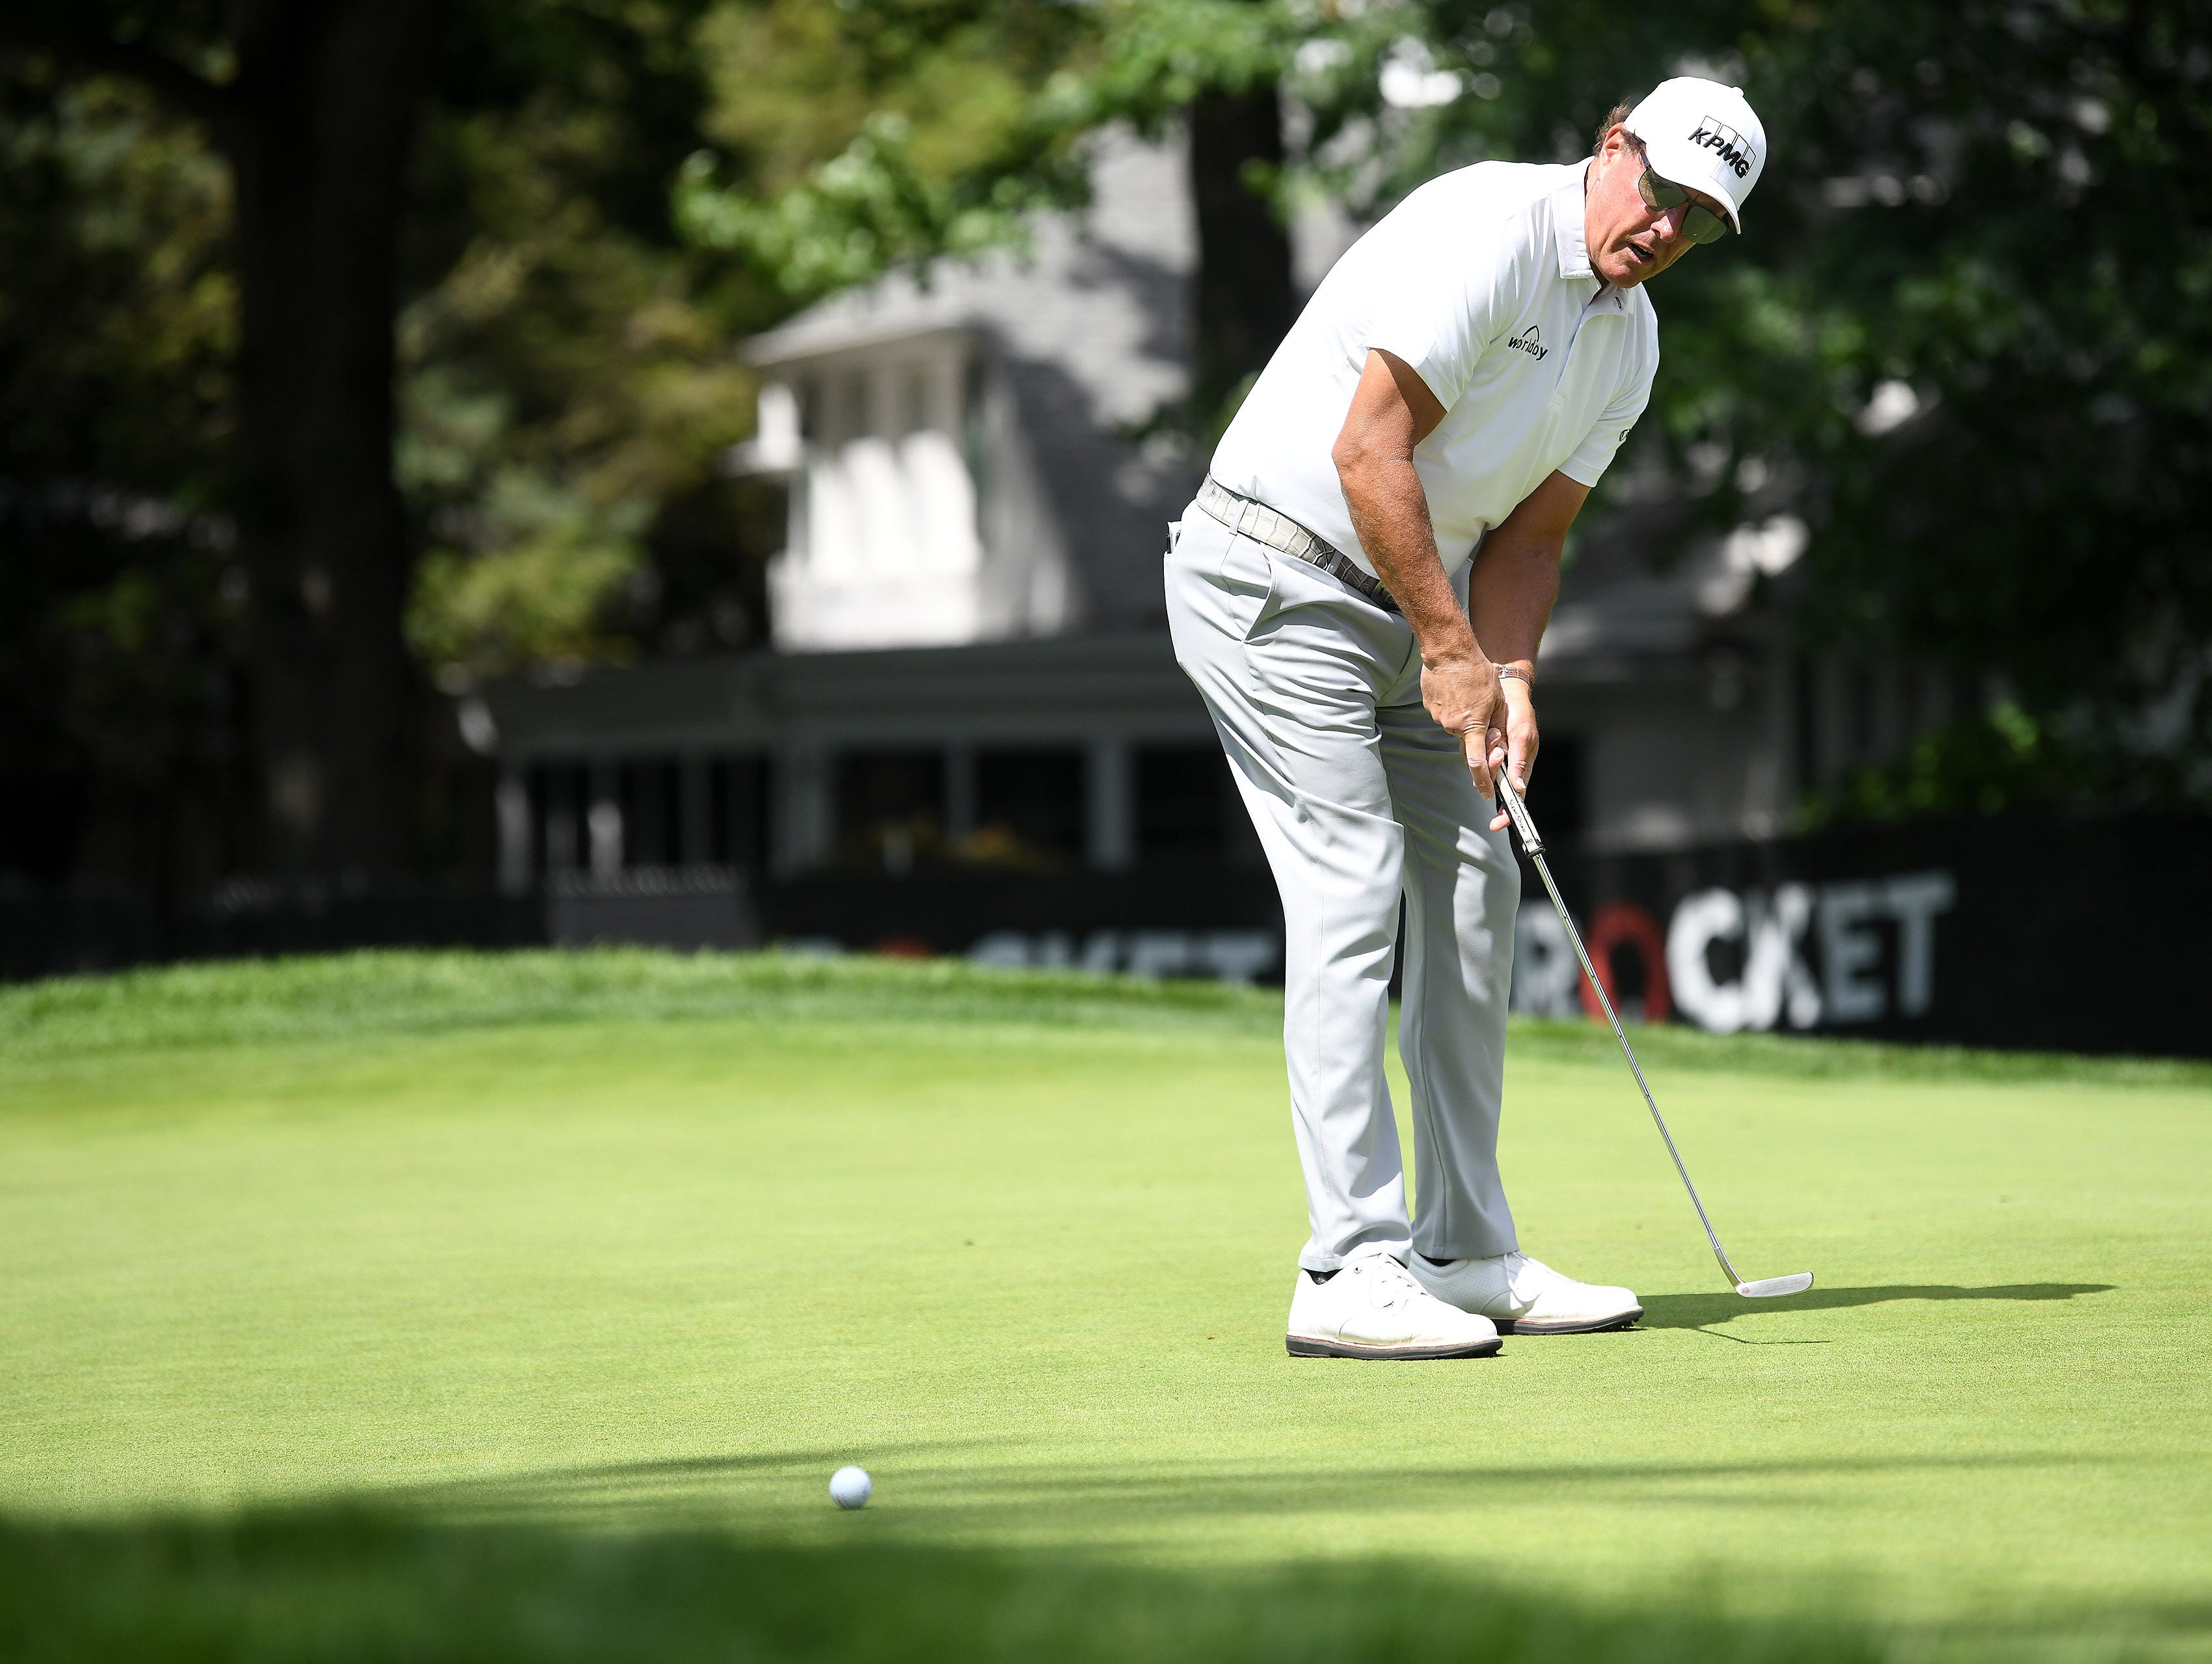 Phil Mickelson putts and barely misses on the ninth green.